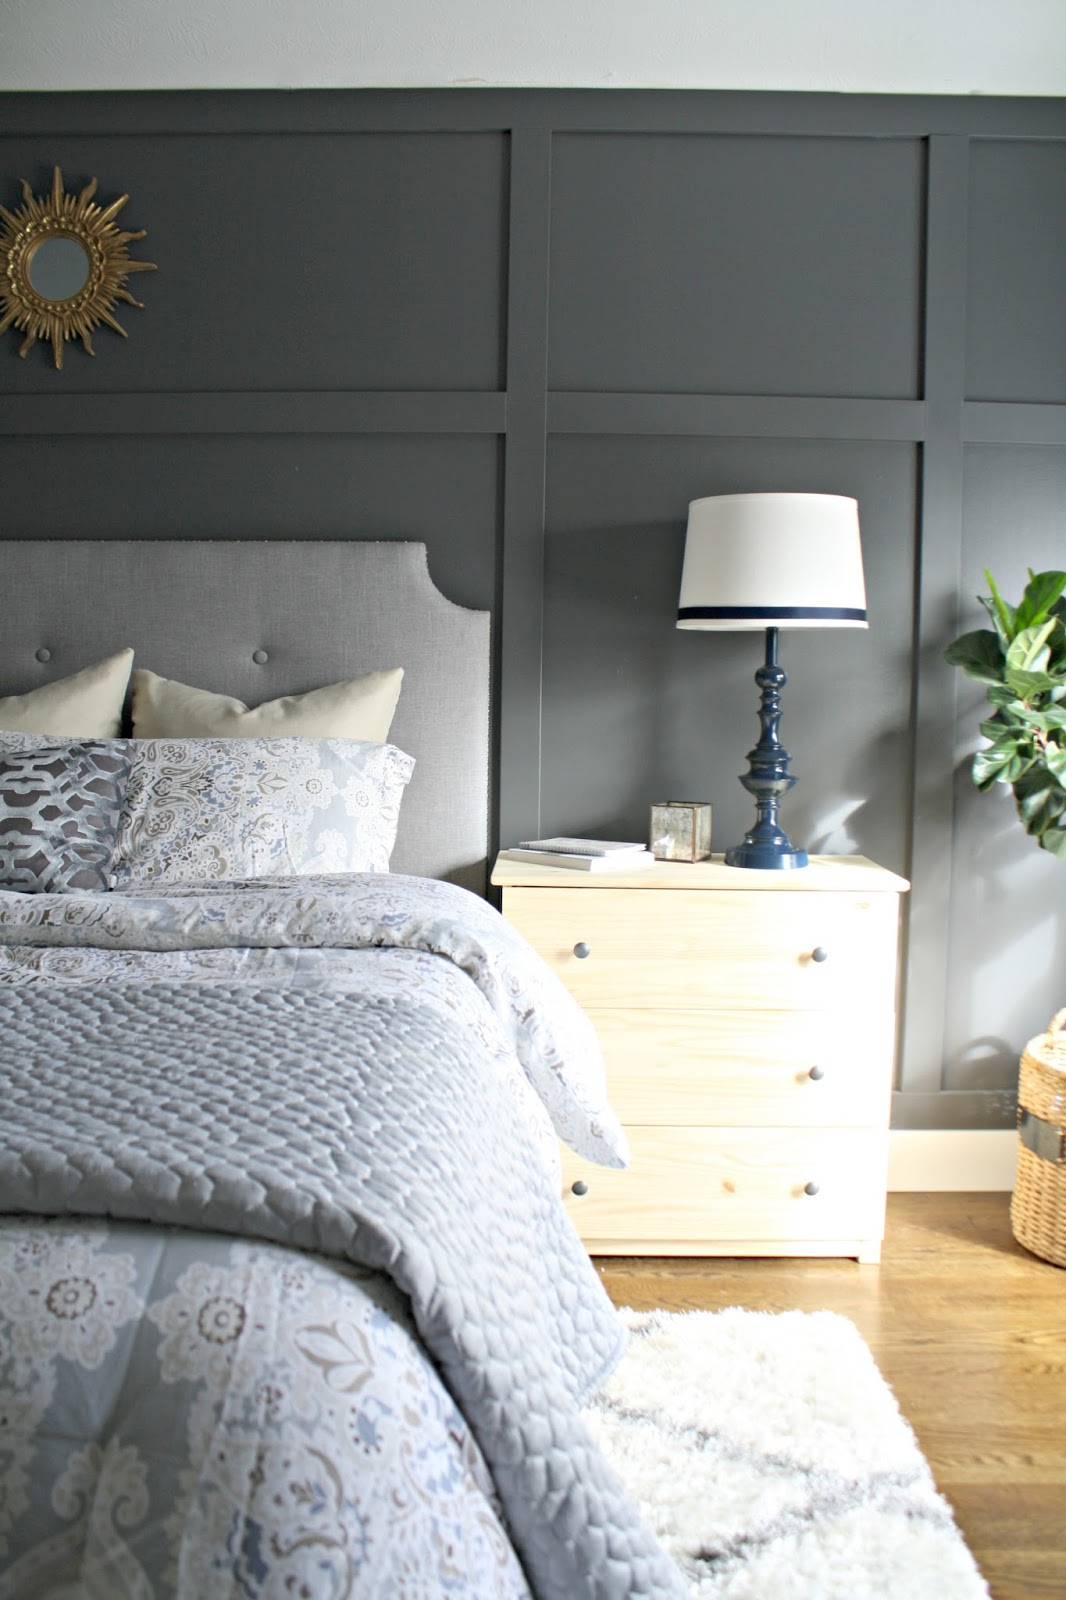 Behind The Bed Brilliance: Creative Accent Wall Ideas For Your Headboard Area